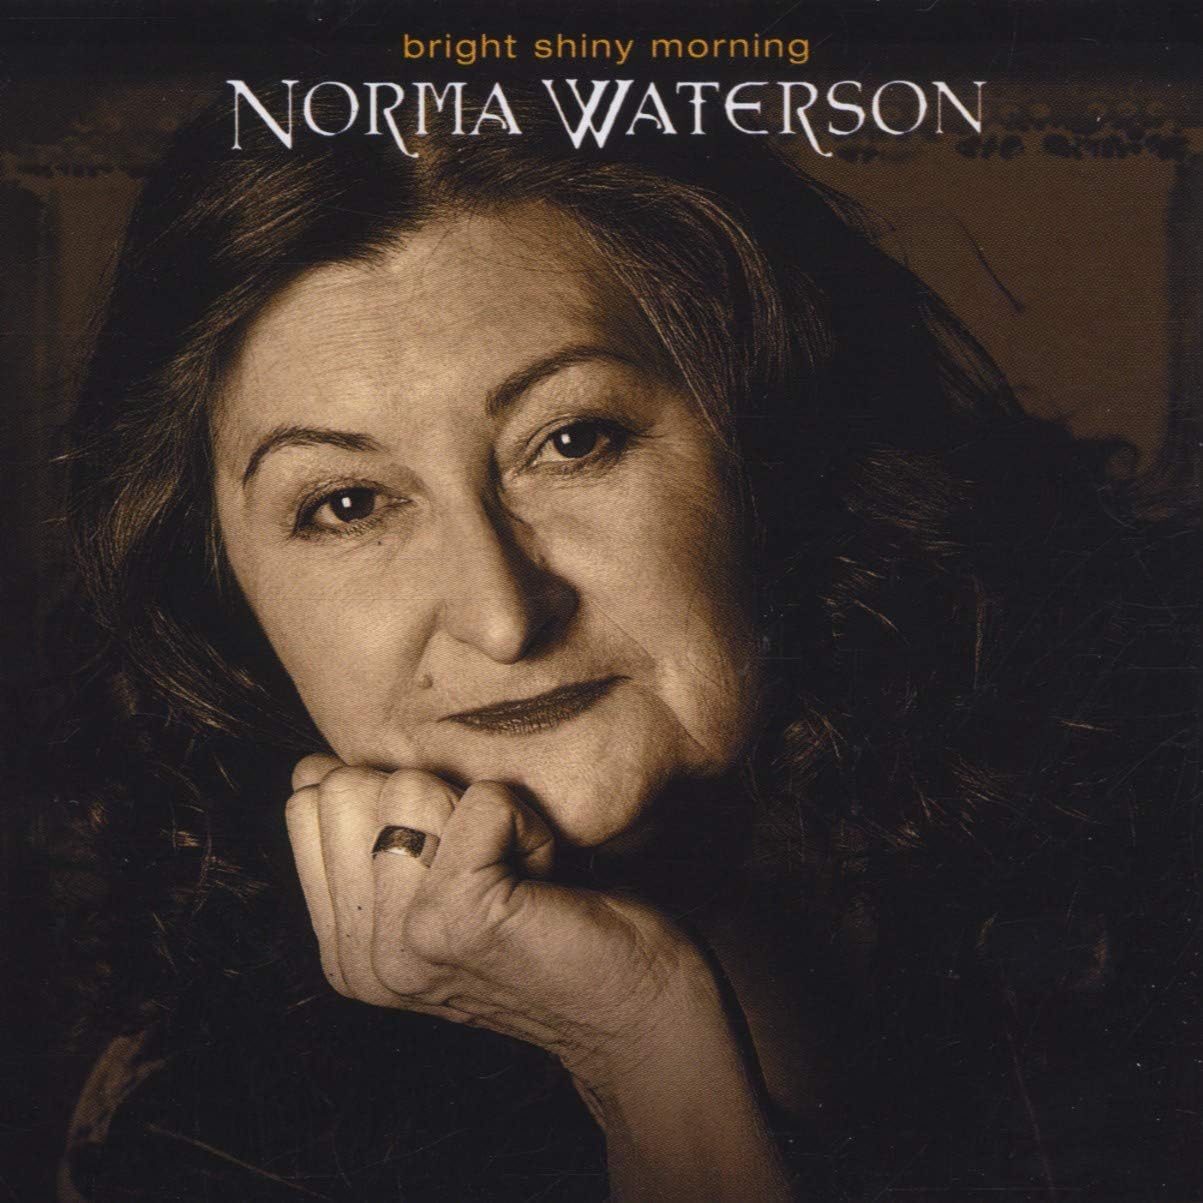 USED CD - Norma Waterson - Bright Shiny Morning